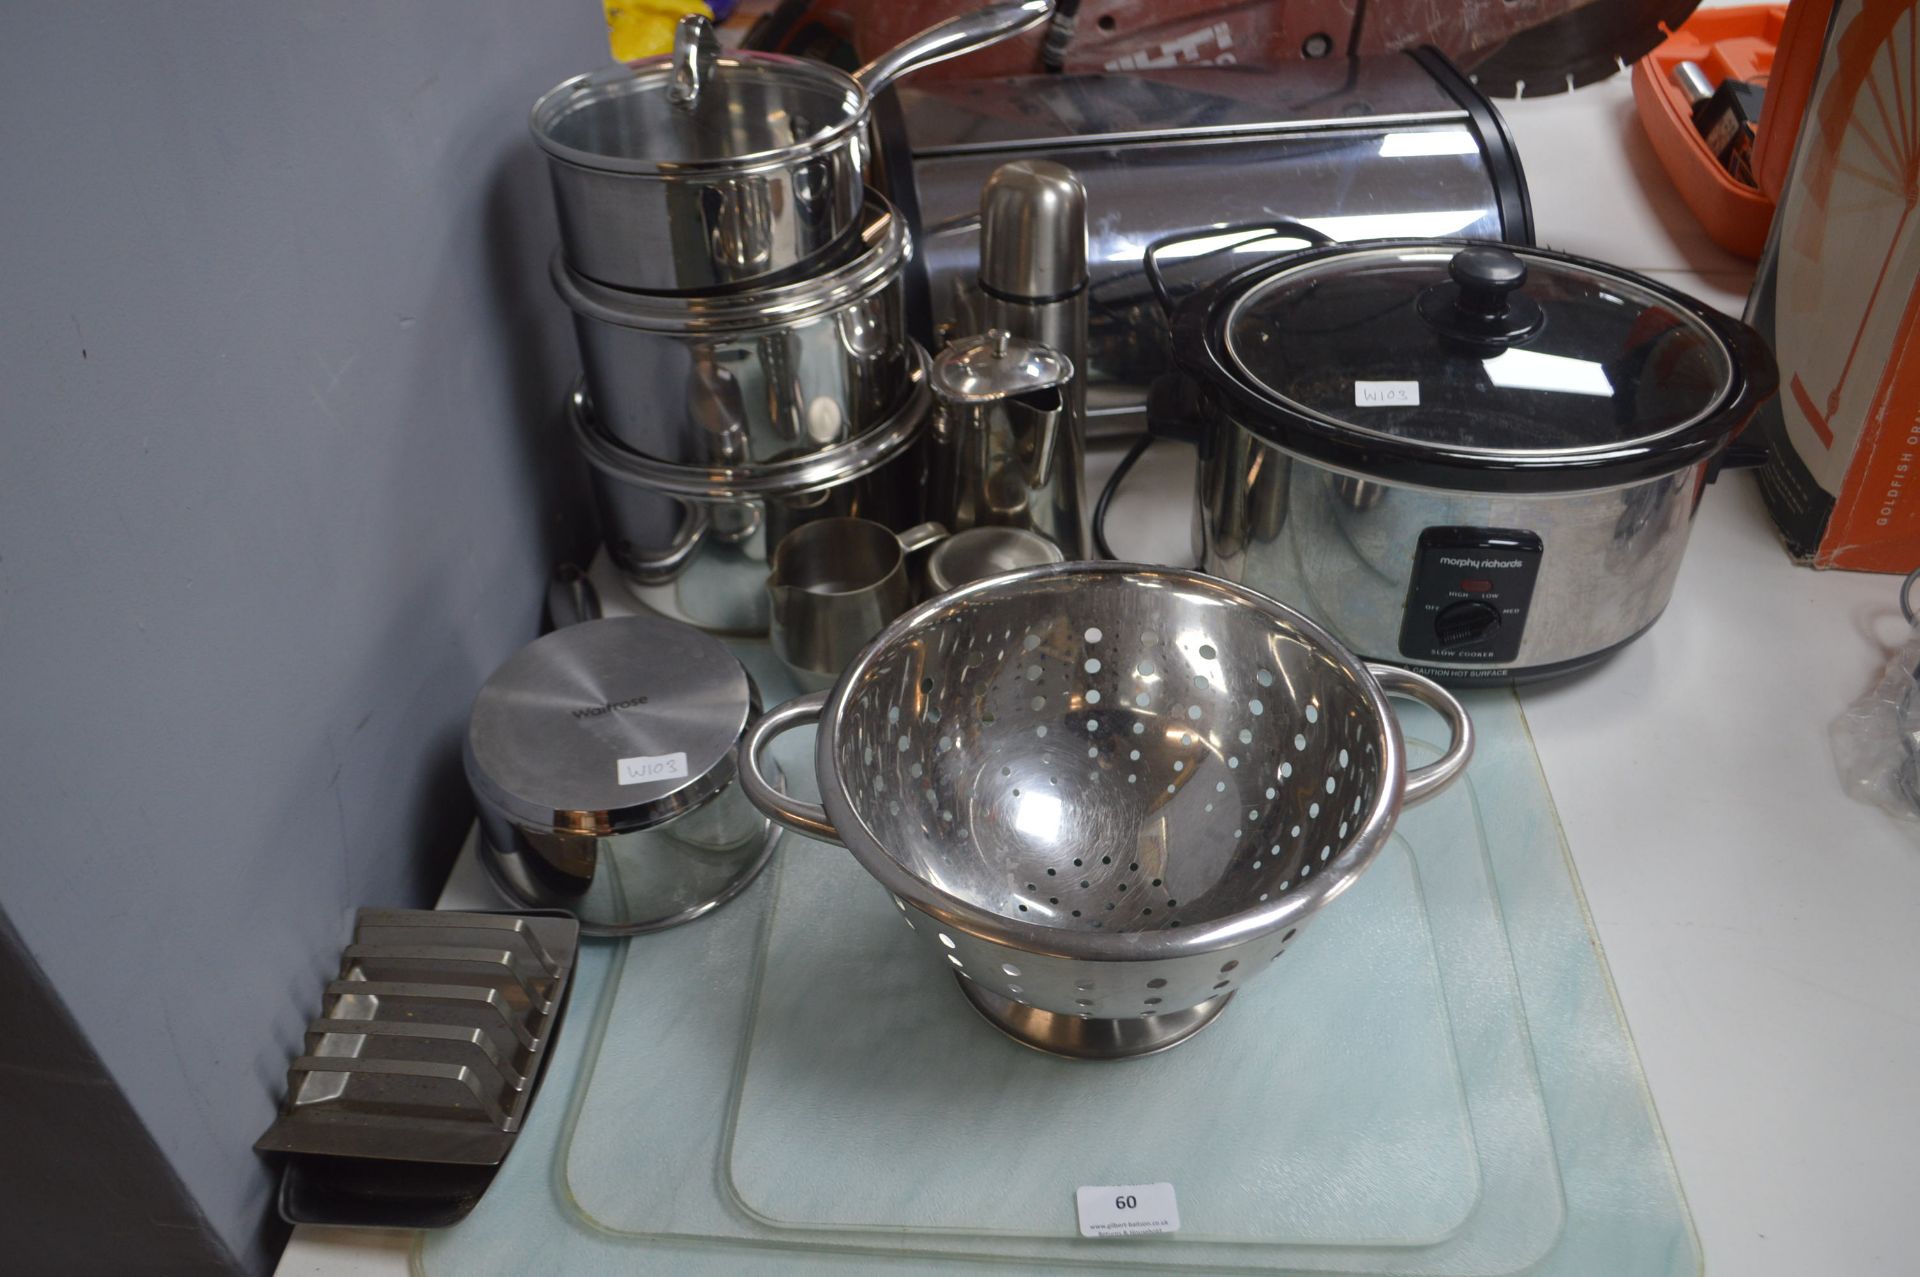 Kitchenware including Stainless Steel Pans, Morphy Richards Slow Cooker etc